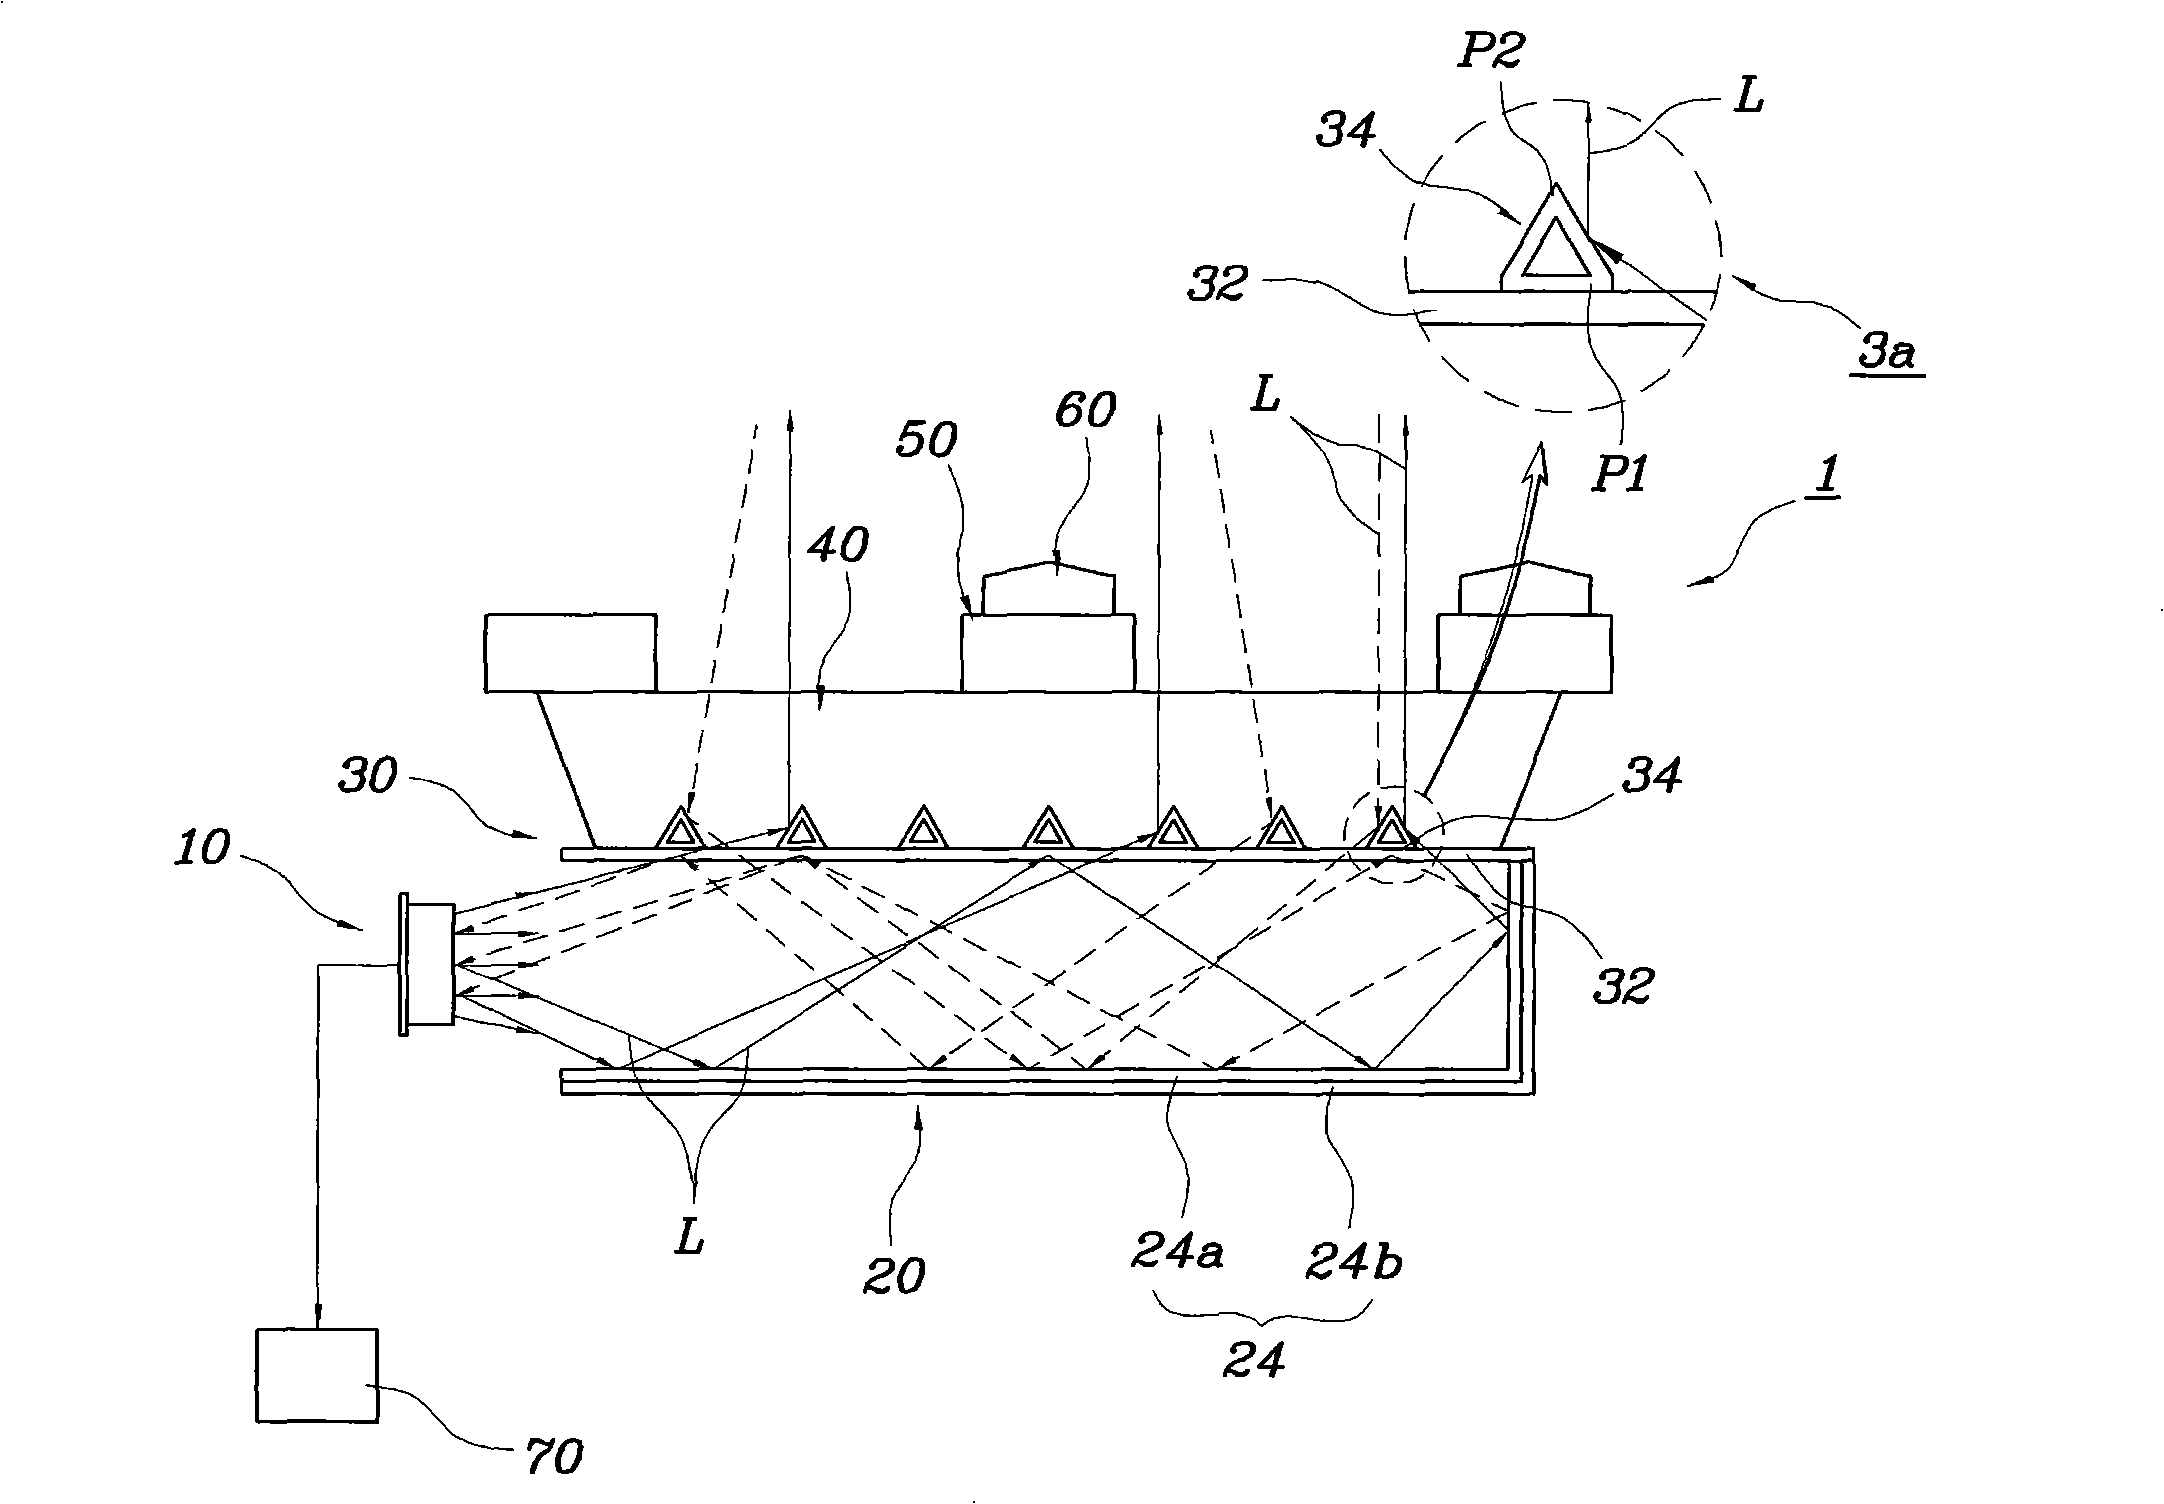 Radio wave transmission/reception device for vehicles